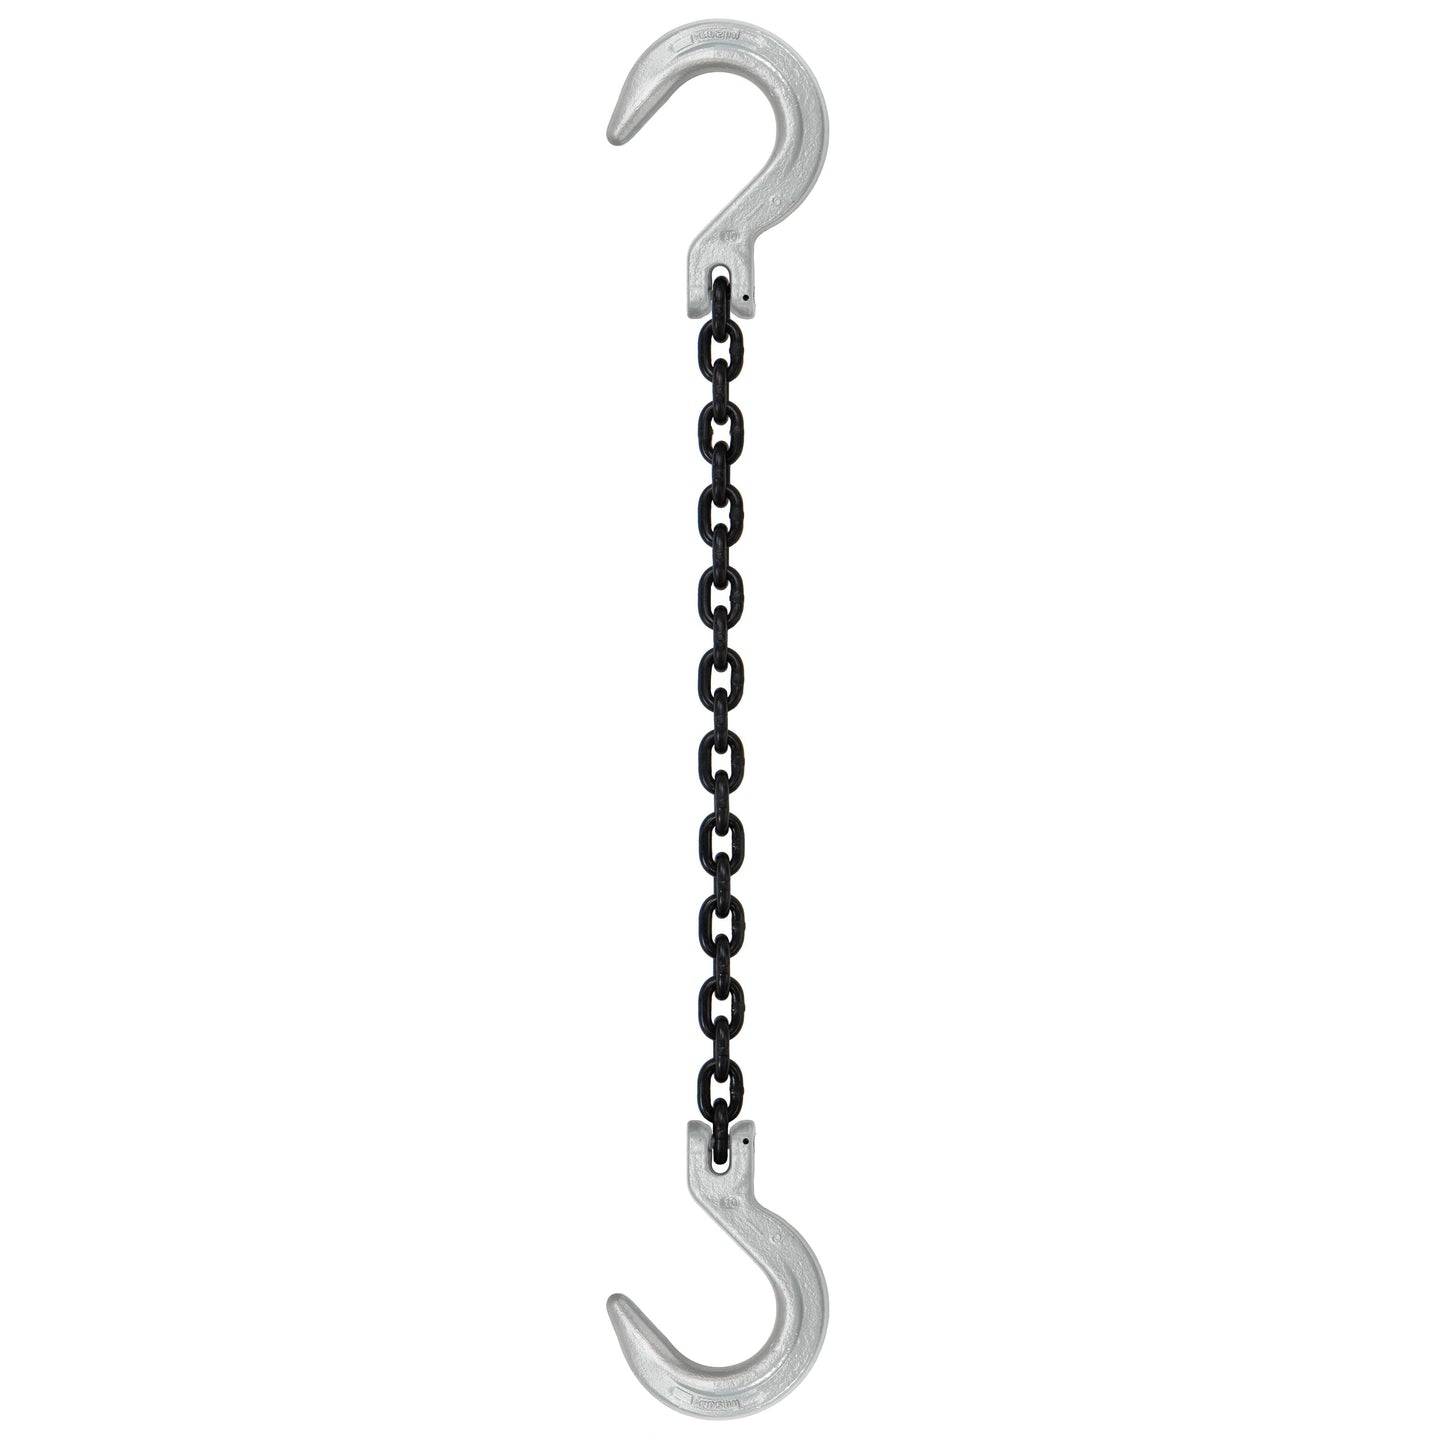 932 inch x 16 foot Domestic Single Leg Chain Sling w Crosby Foundry & Foundry Hooks Grade 100 image 1 of 2